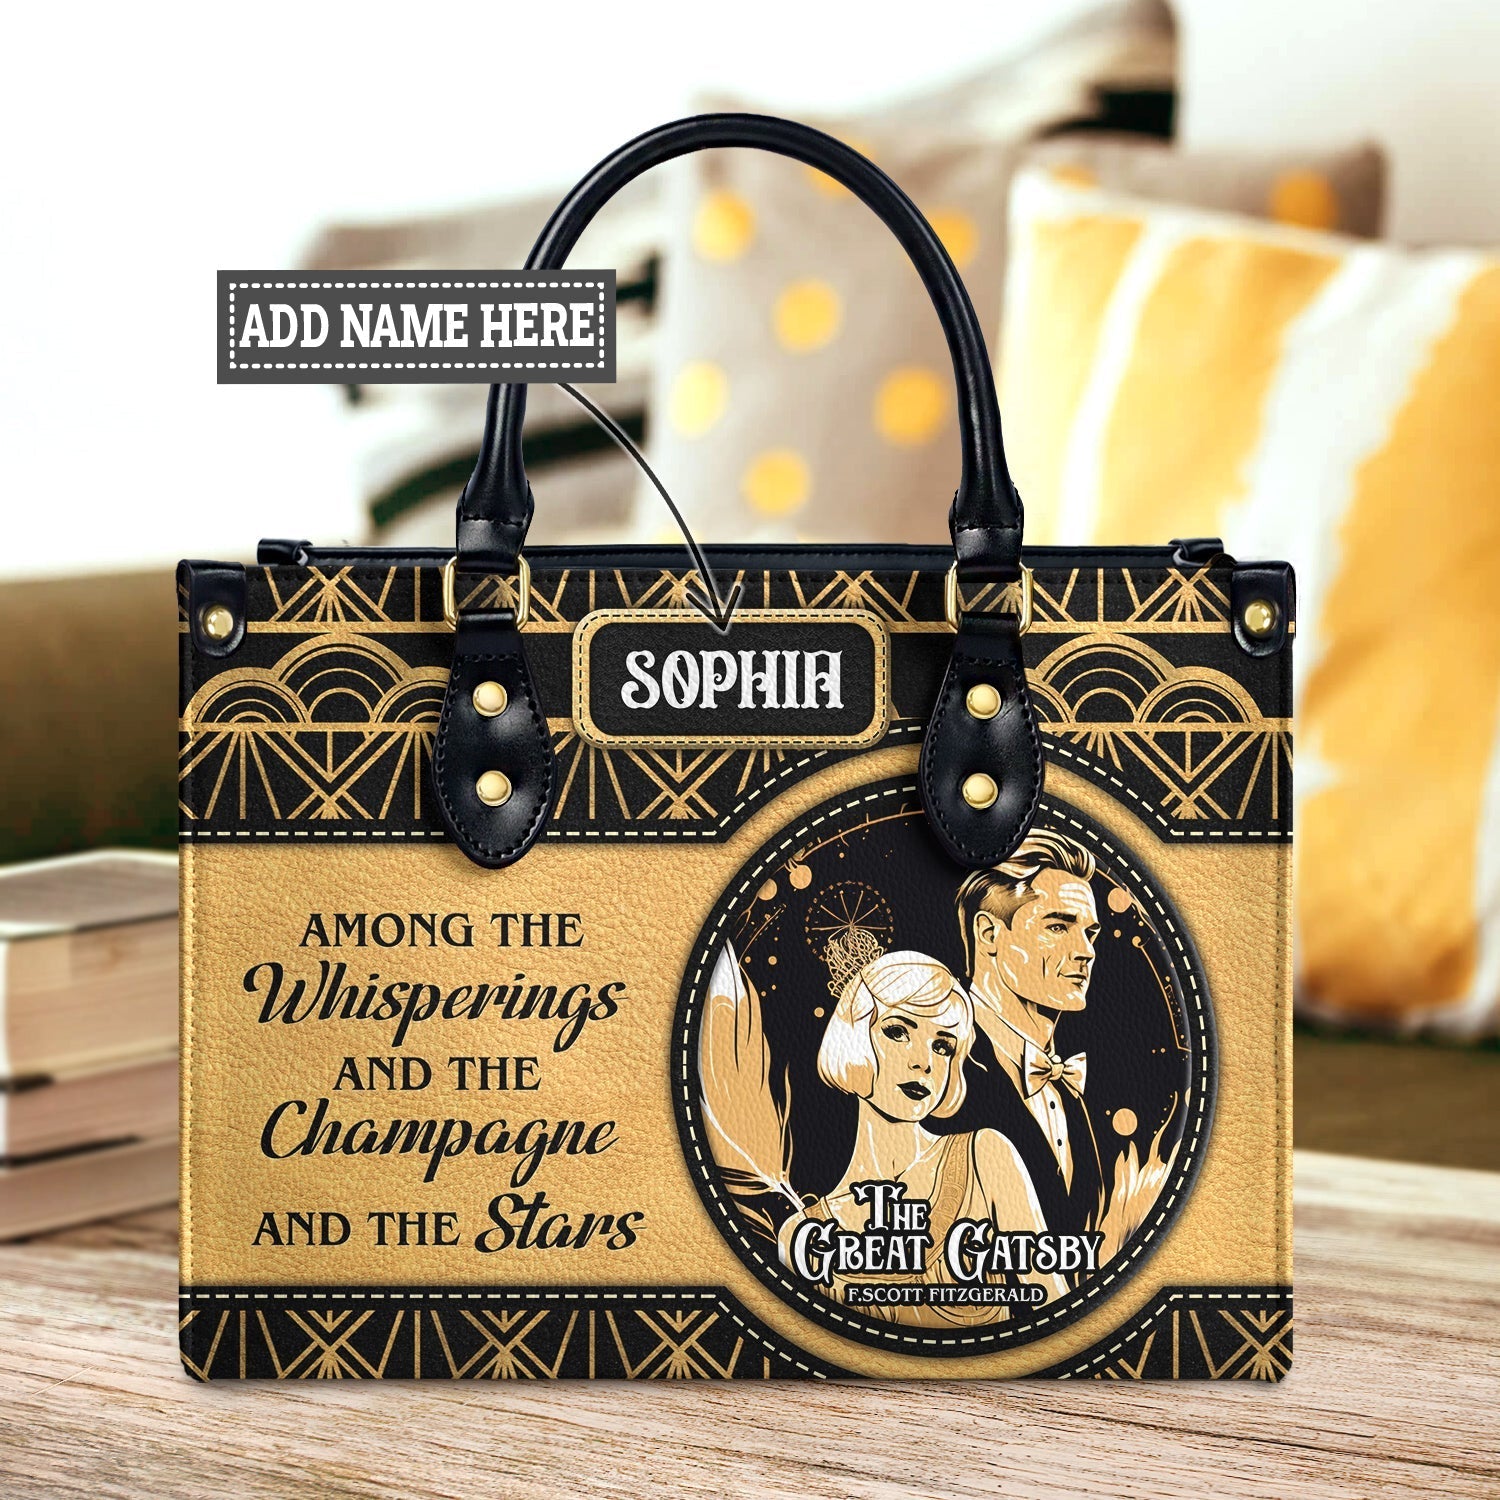 The Great Gatsby F Scott Fitzgerald The Whisperings The Champagne And The Stars TTLZ2202003A Leather Bag